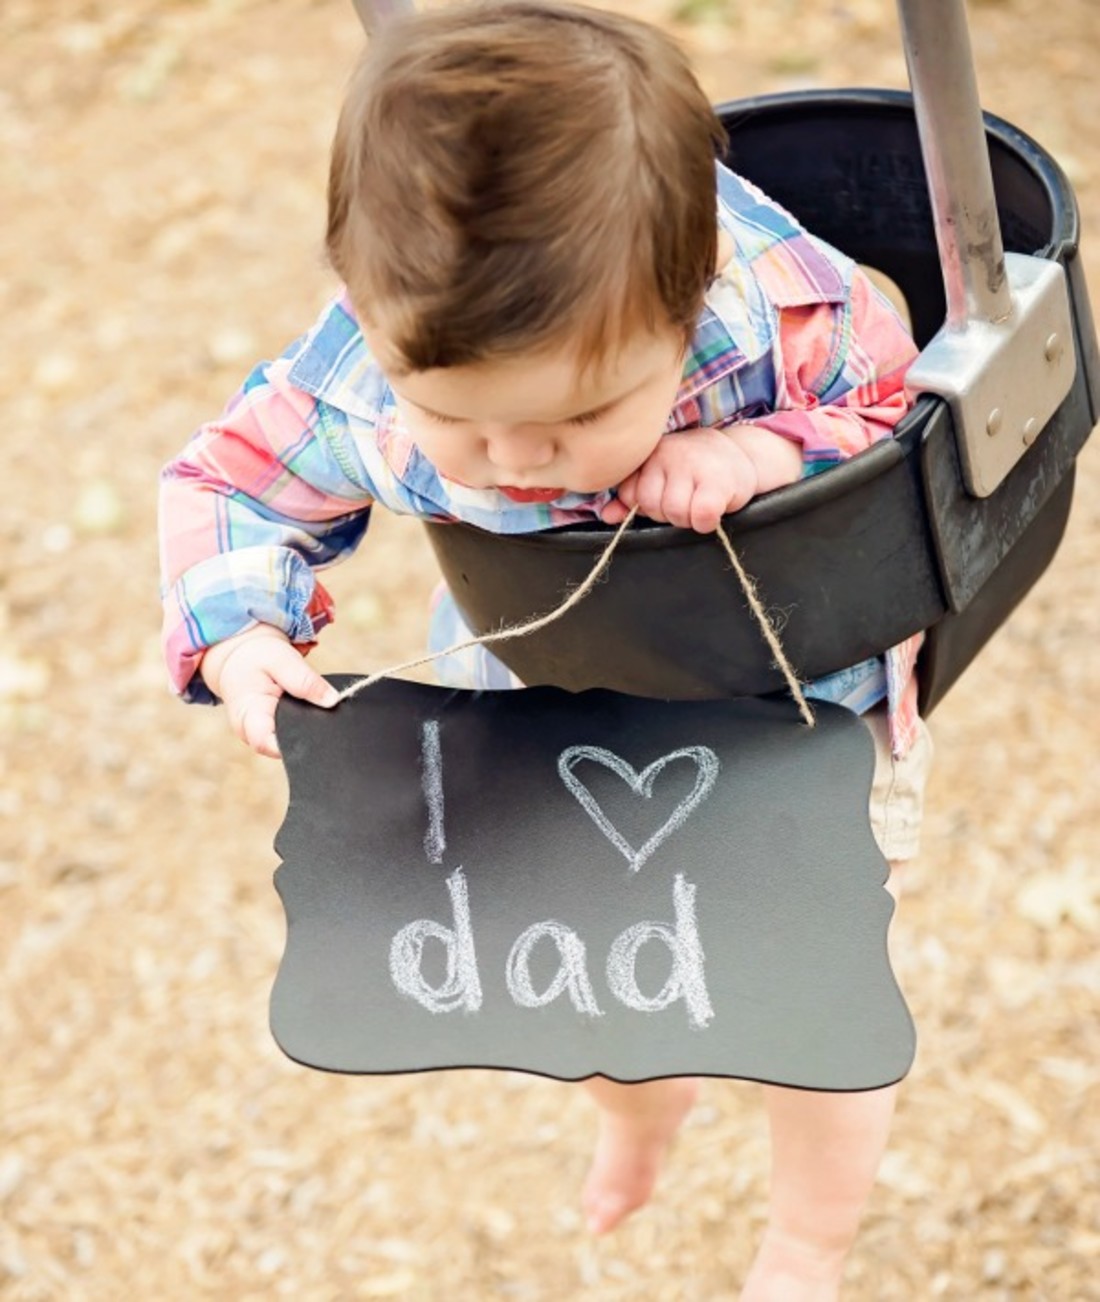 20 Ways to Make Dads First Fathers Day Special pic